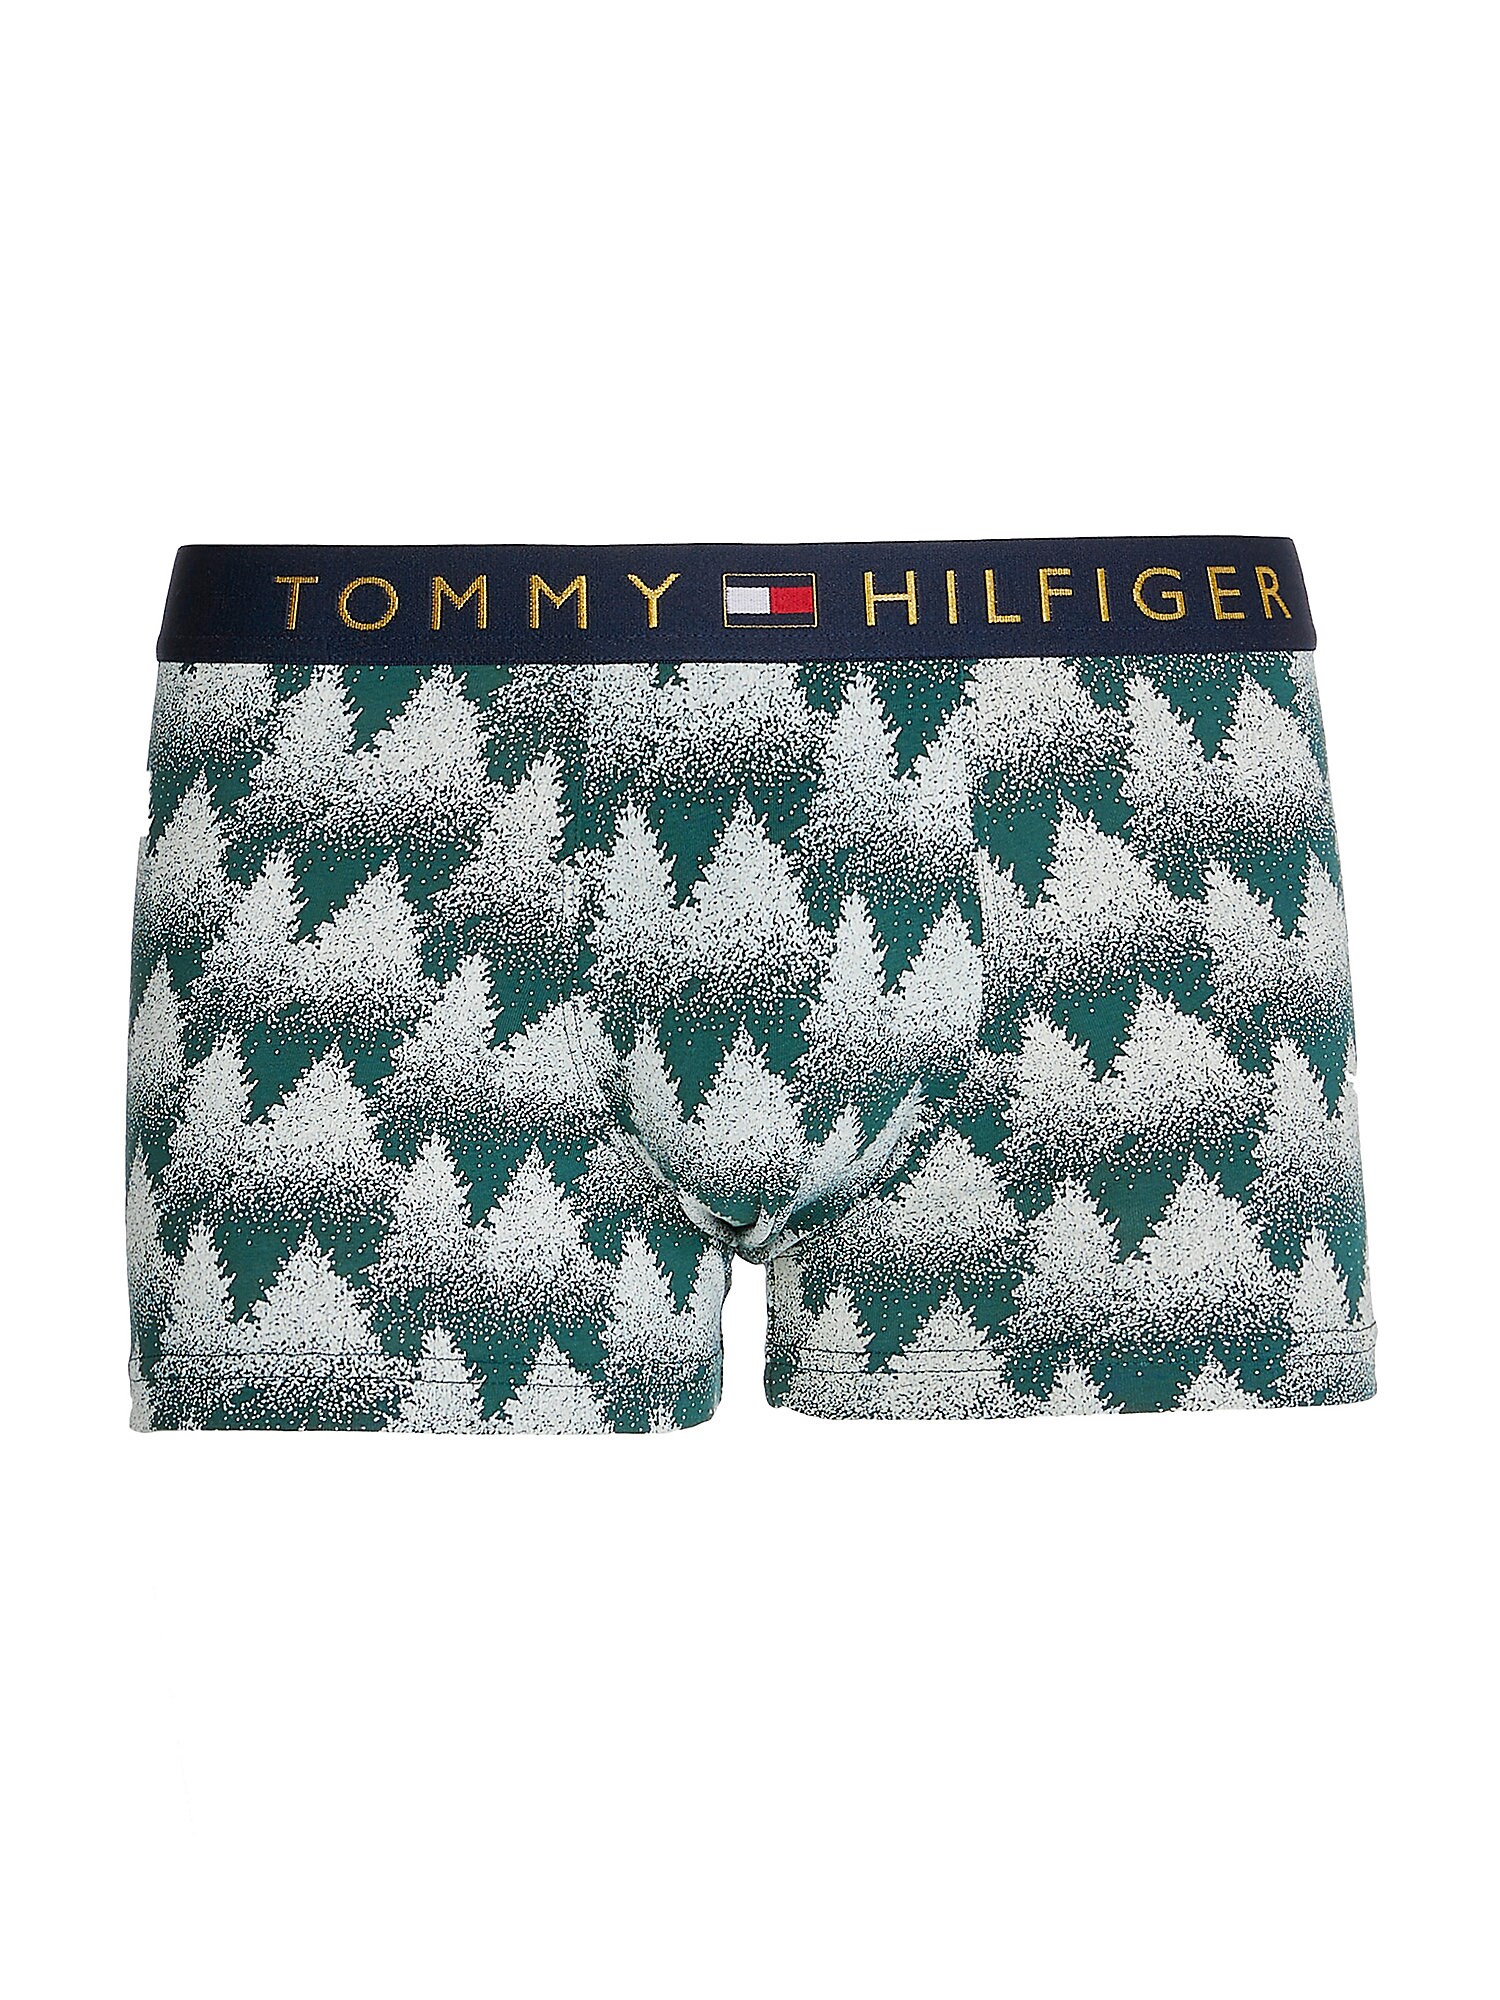 TOMMY HILFIGER Boxershorts grn / wei / gold / rot